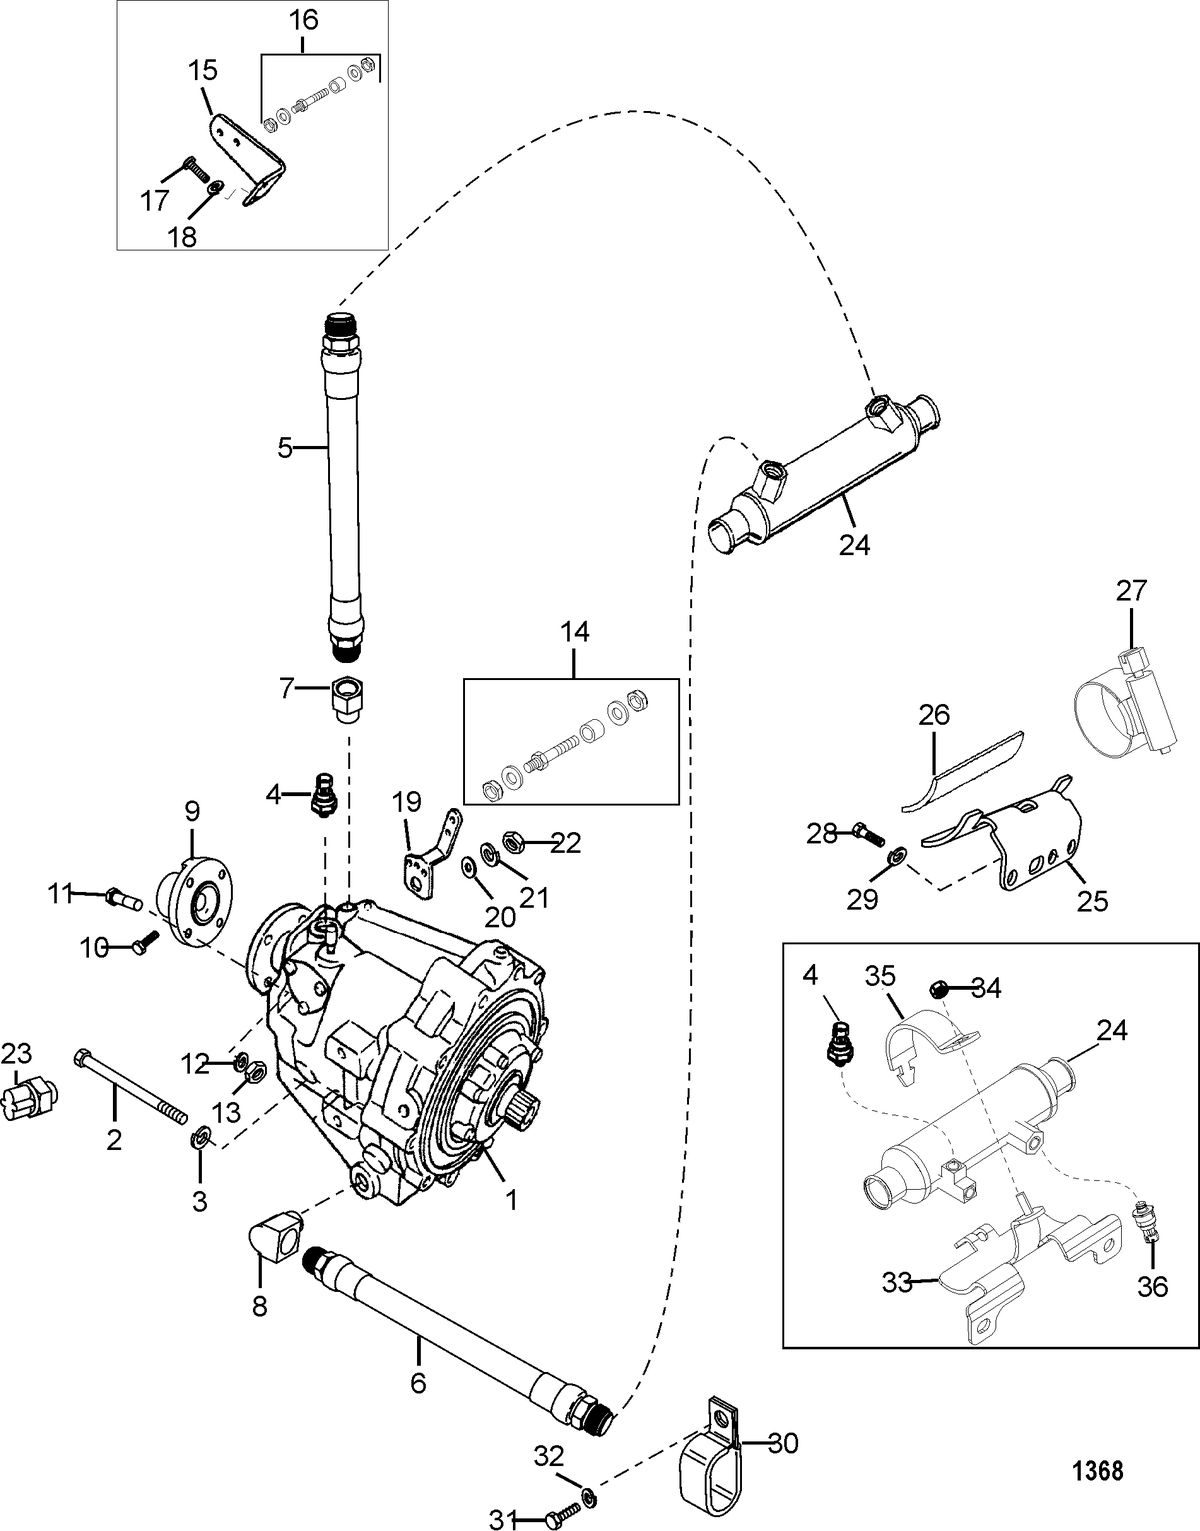 MERCRUISER 5.7/6.2L MPI INBOARD Transmission and Related Parts(BORG-WARNER 71C &72C)